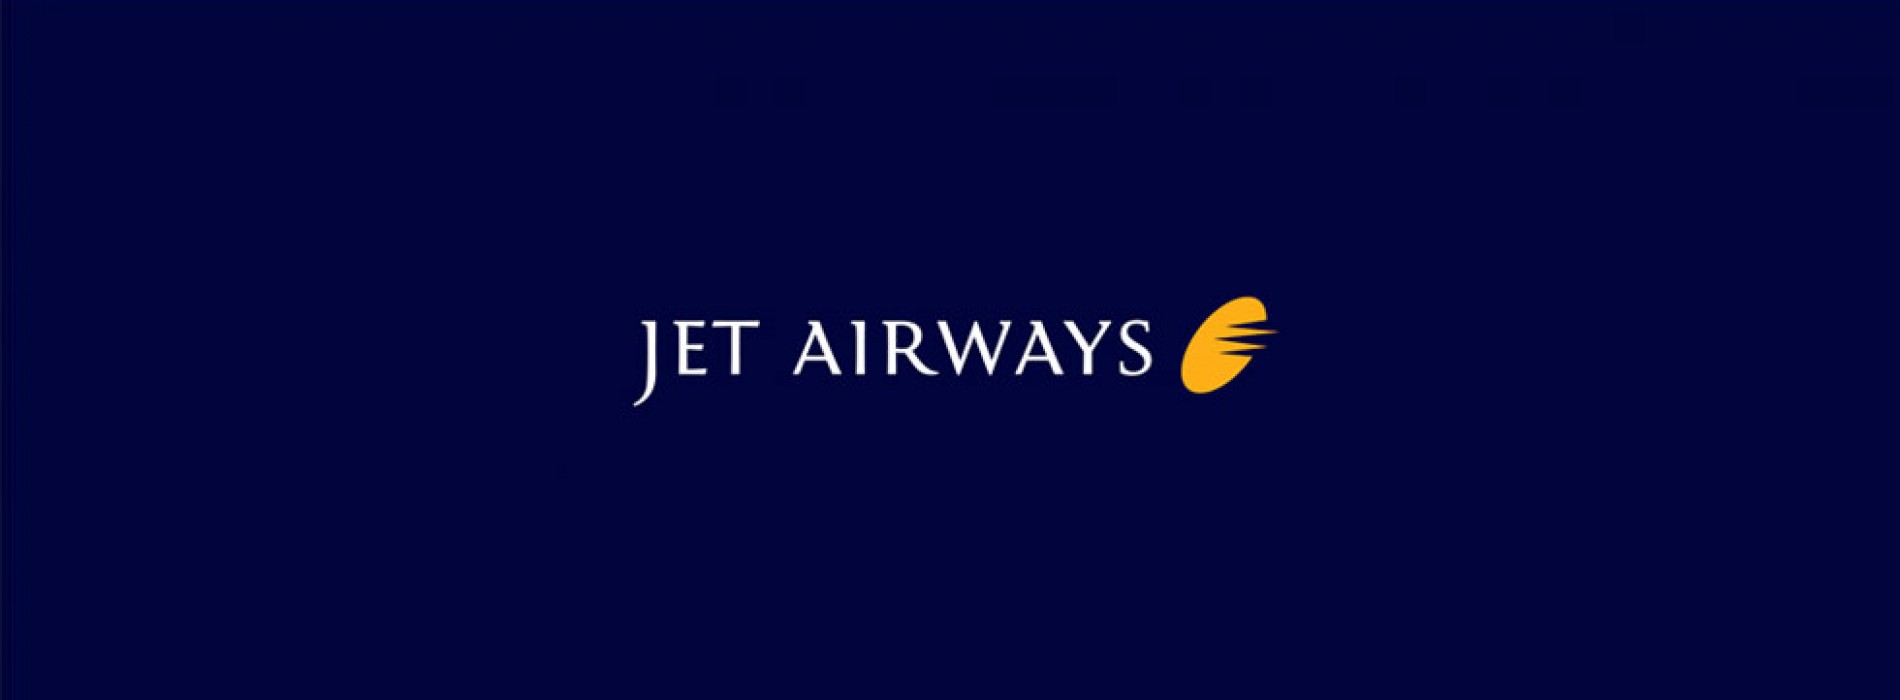 Jet Airways plans in-flight Wi-Fi roll-out